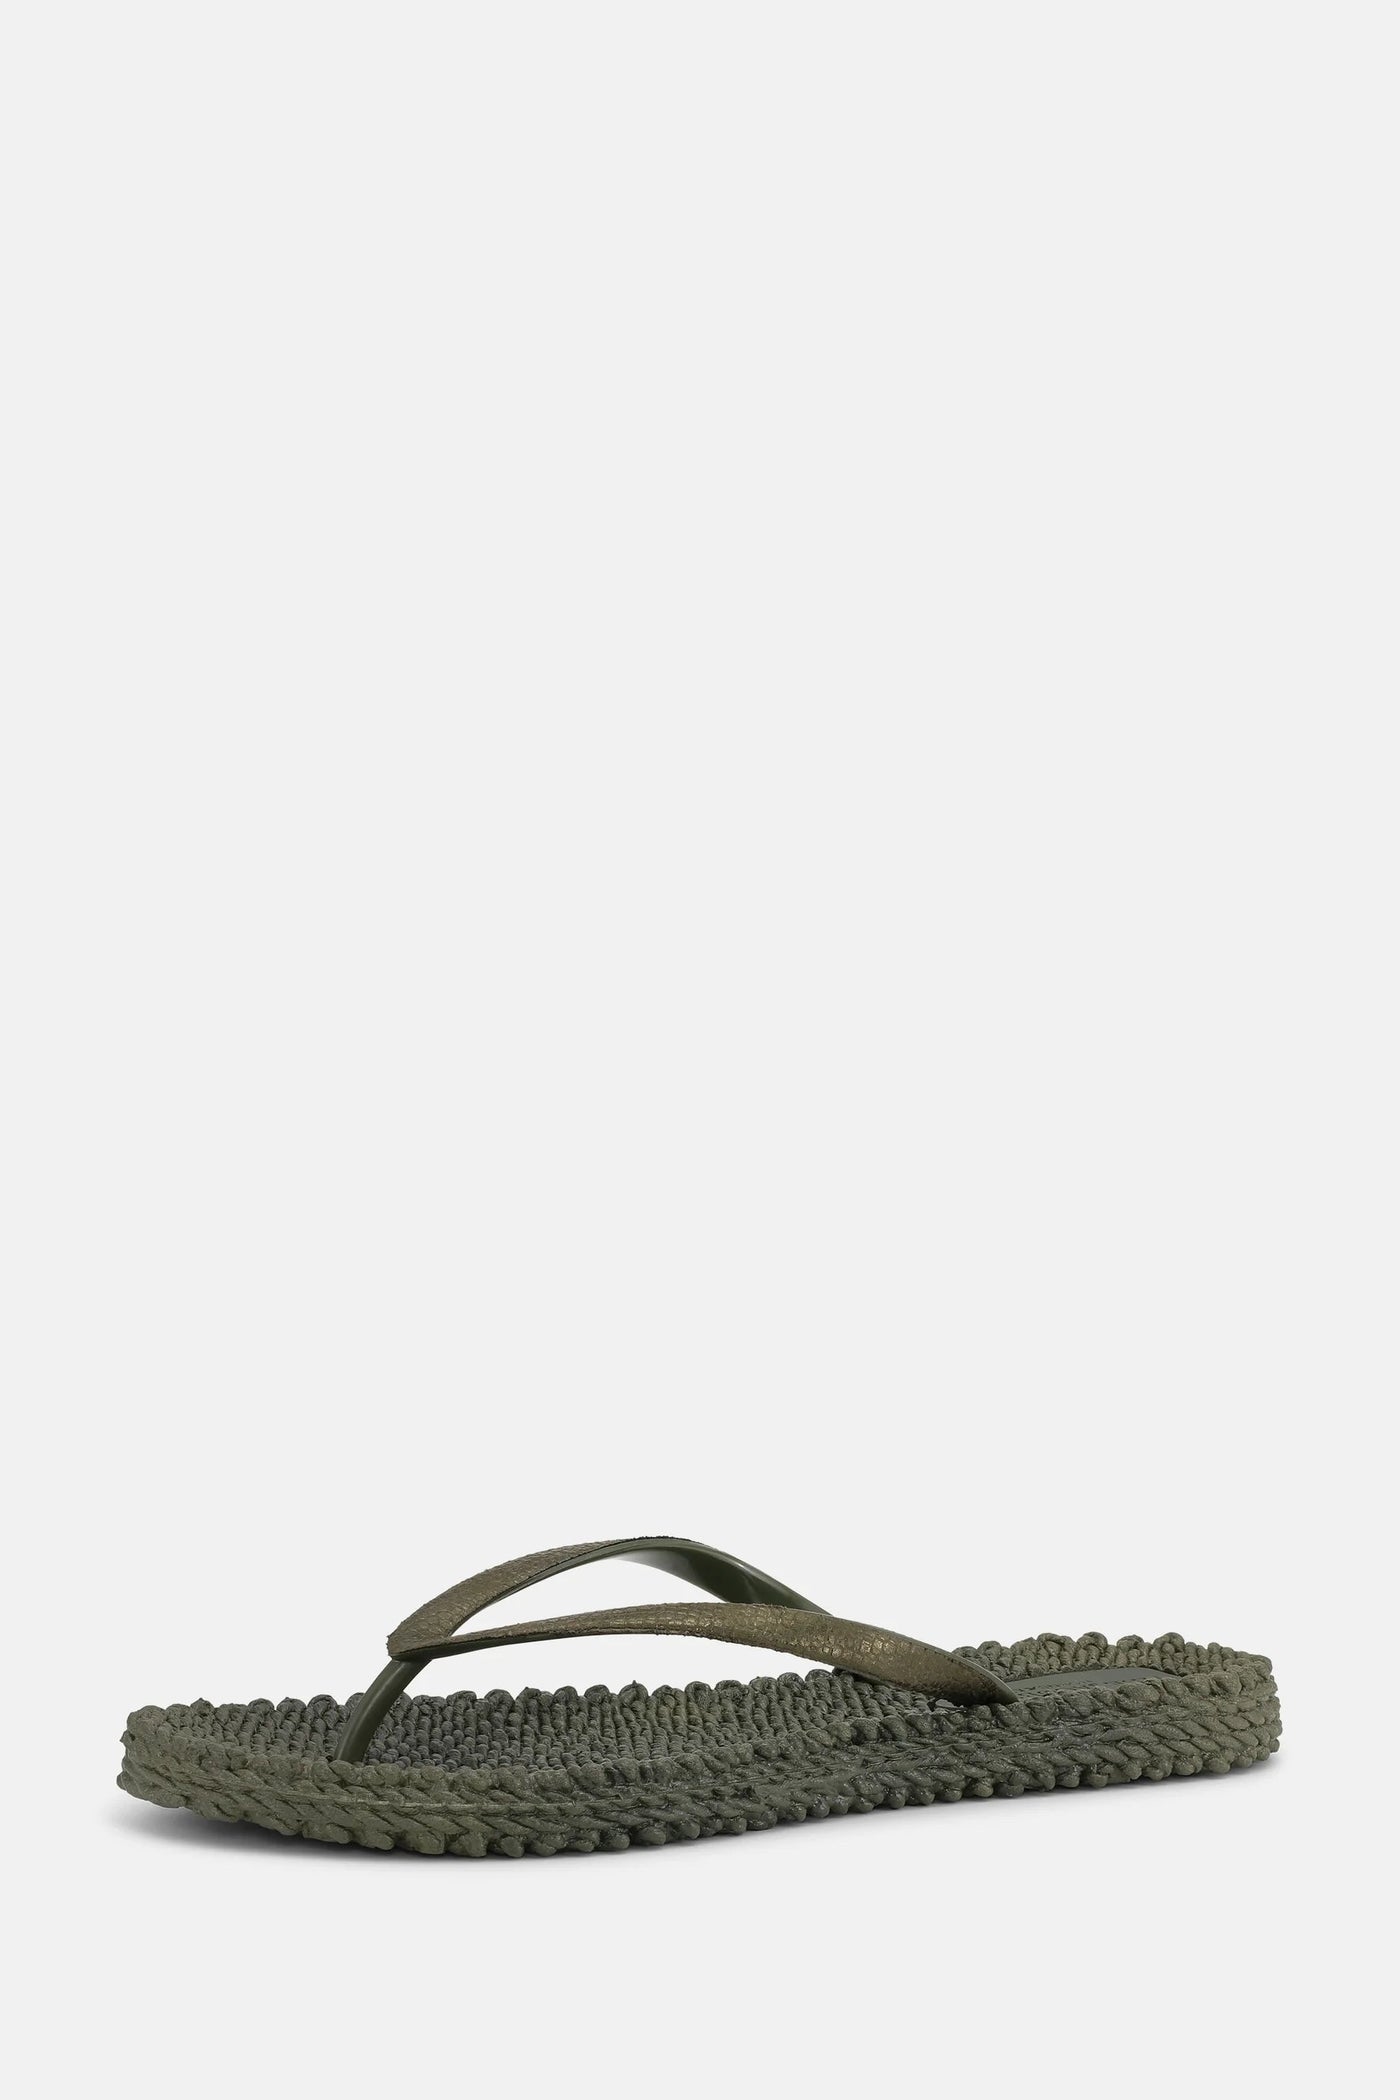 Ilse Jacobsen Army Cheerful Flip Flops with Glitter-Accessories-Ohh! By Gum - Shop Sustainable